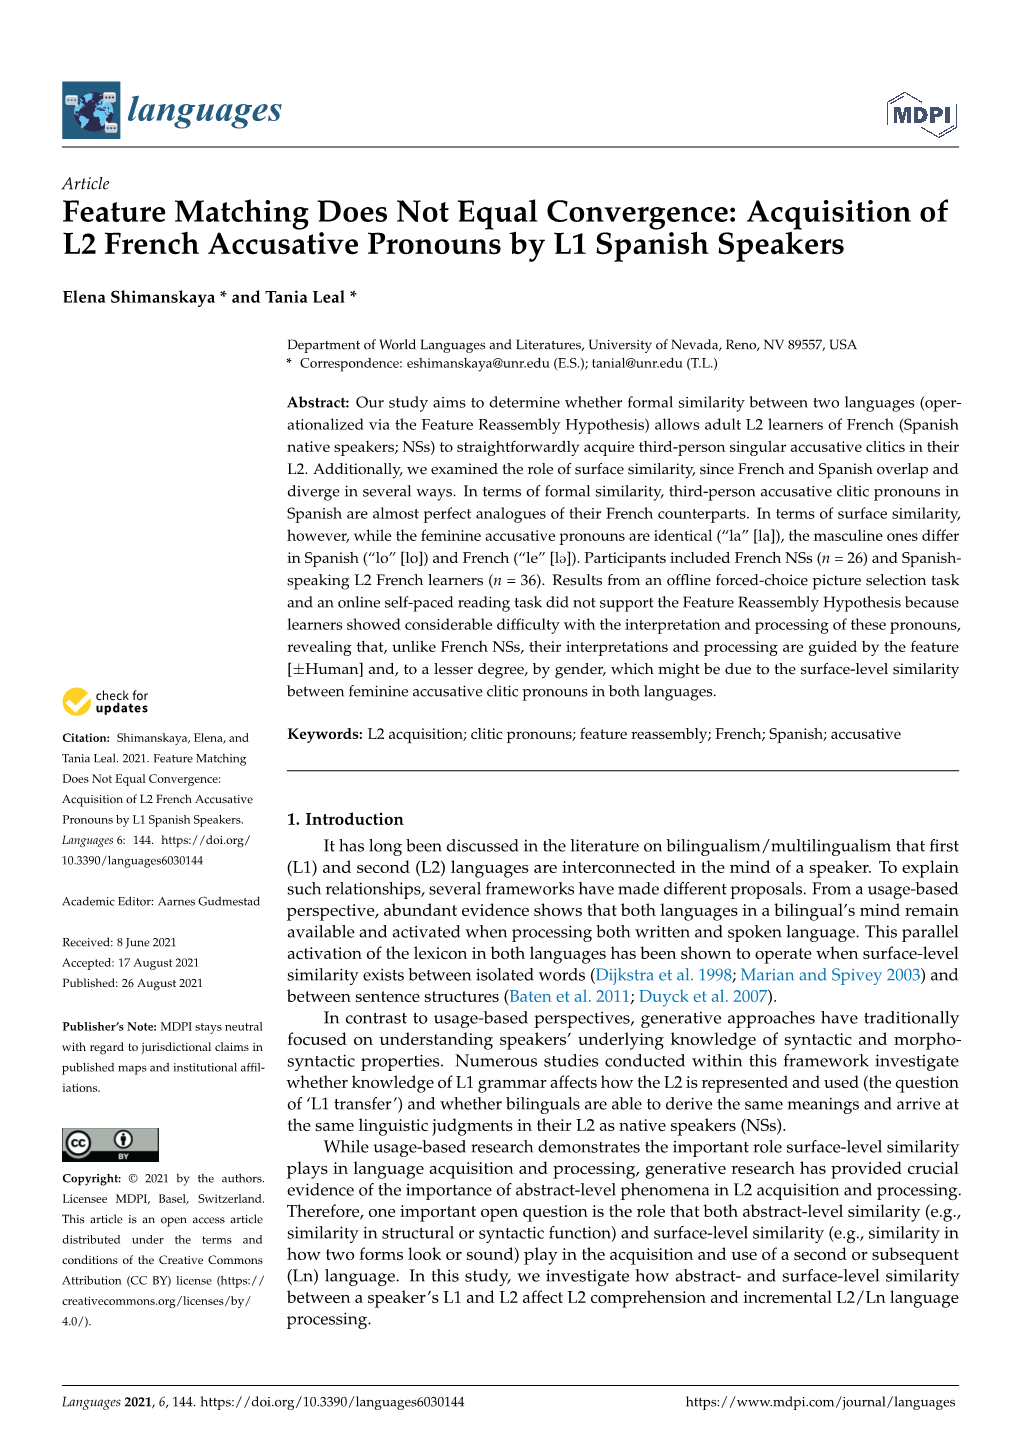 Acquisition of L2 French Accusative Pronouns by L1 Spanish Speakers